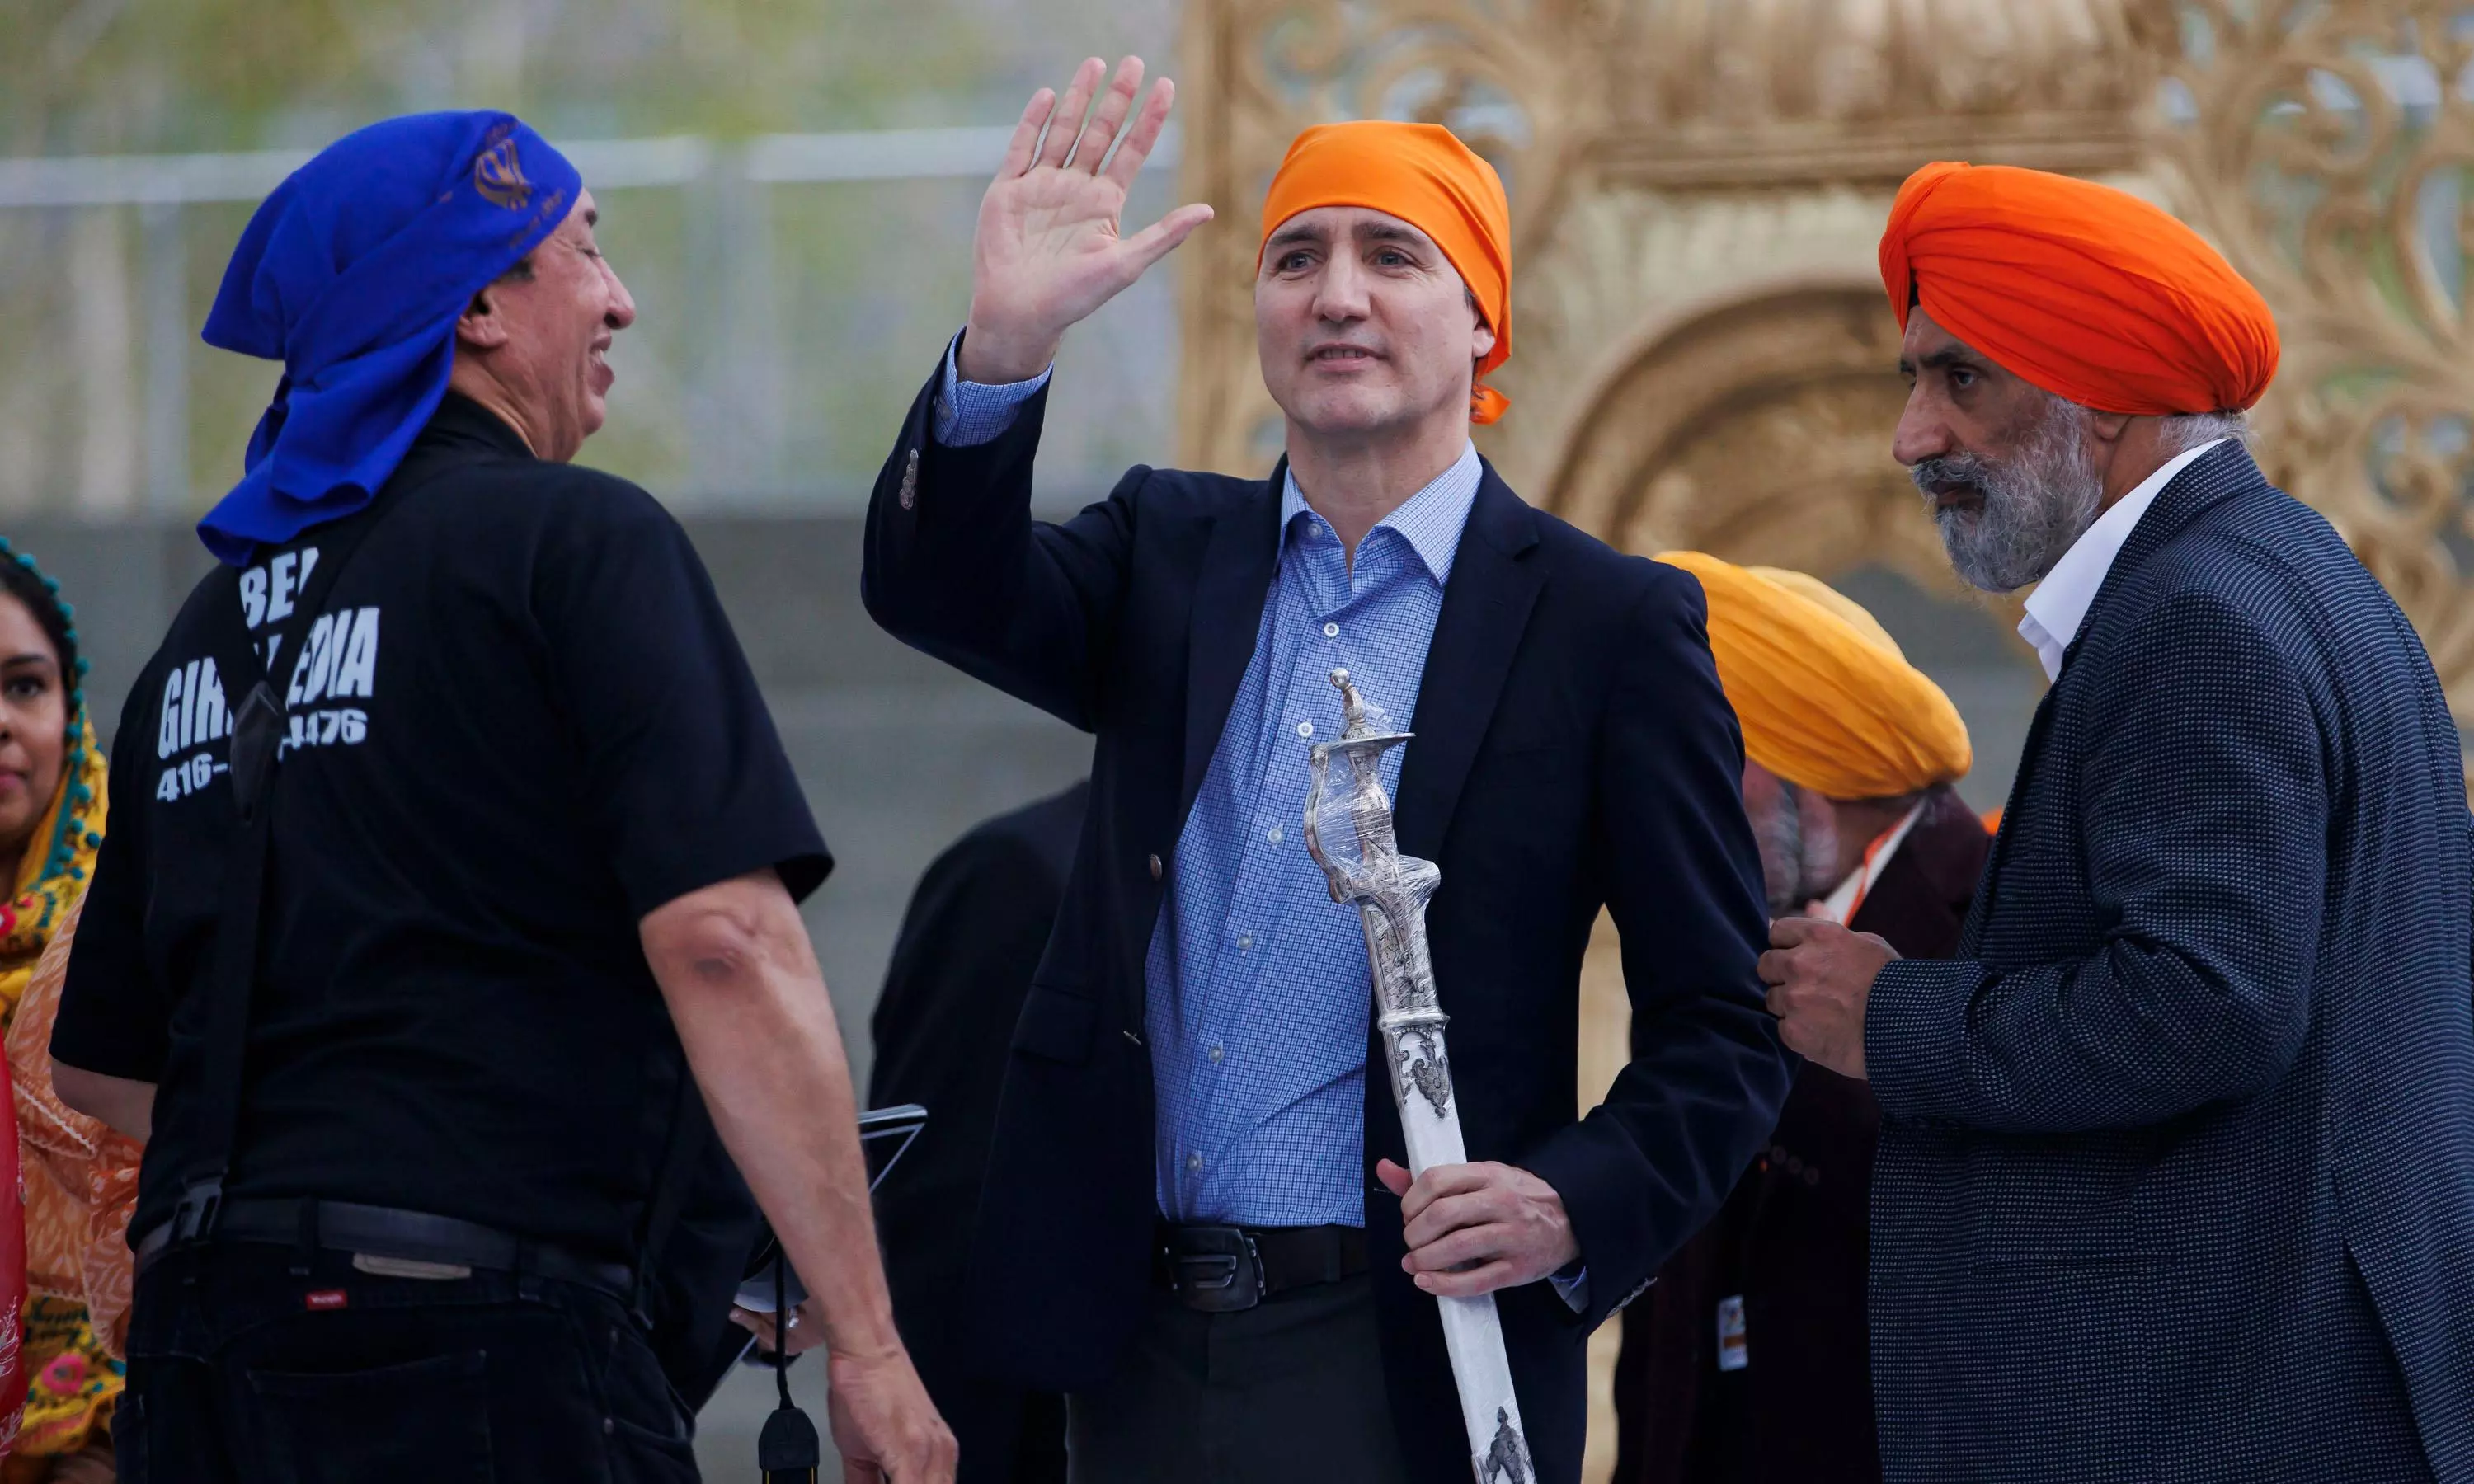 MEA Summons Canadian Diplomat Over Khalistan Slogans Raised at Event Addressed by Trudeau